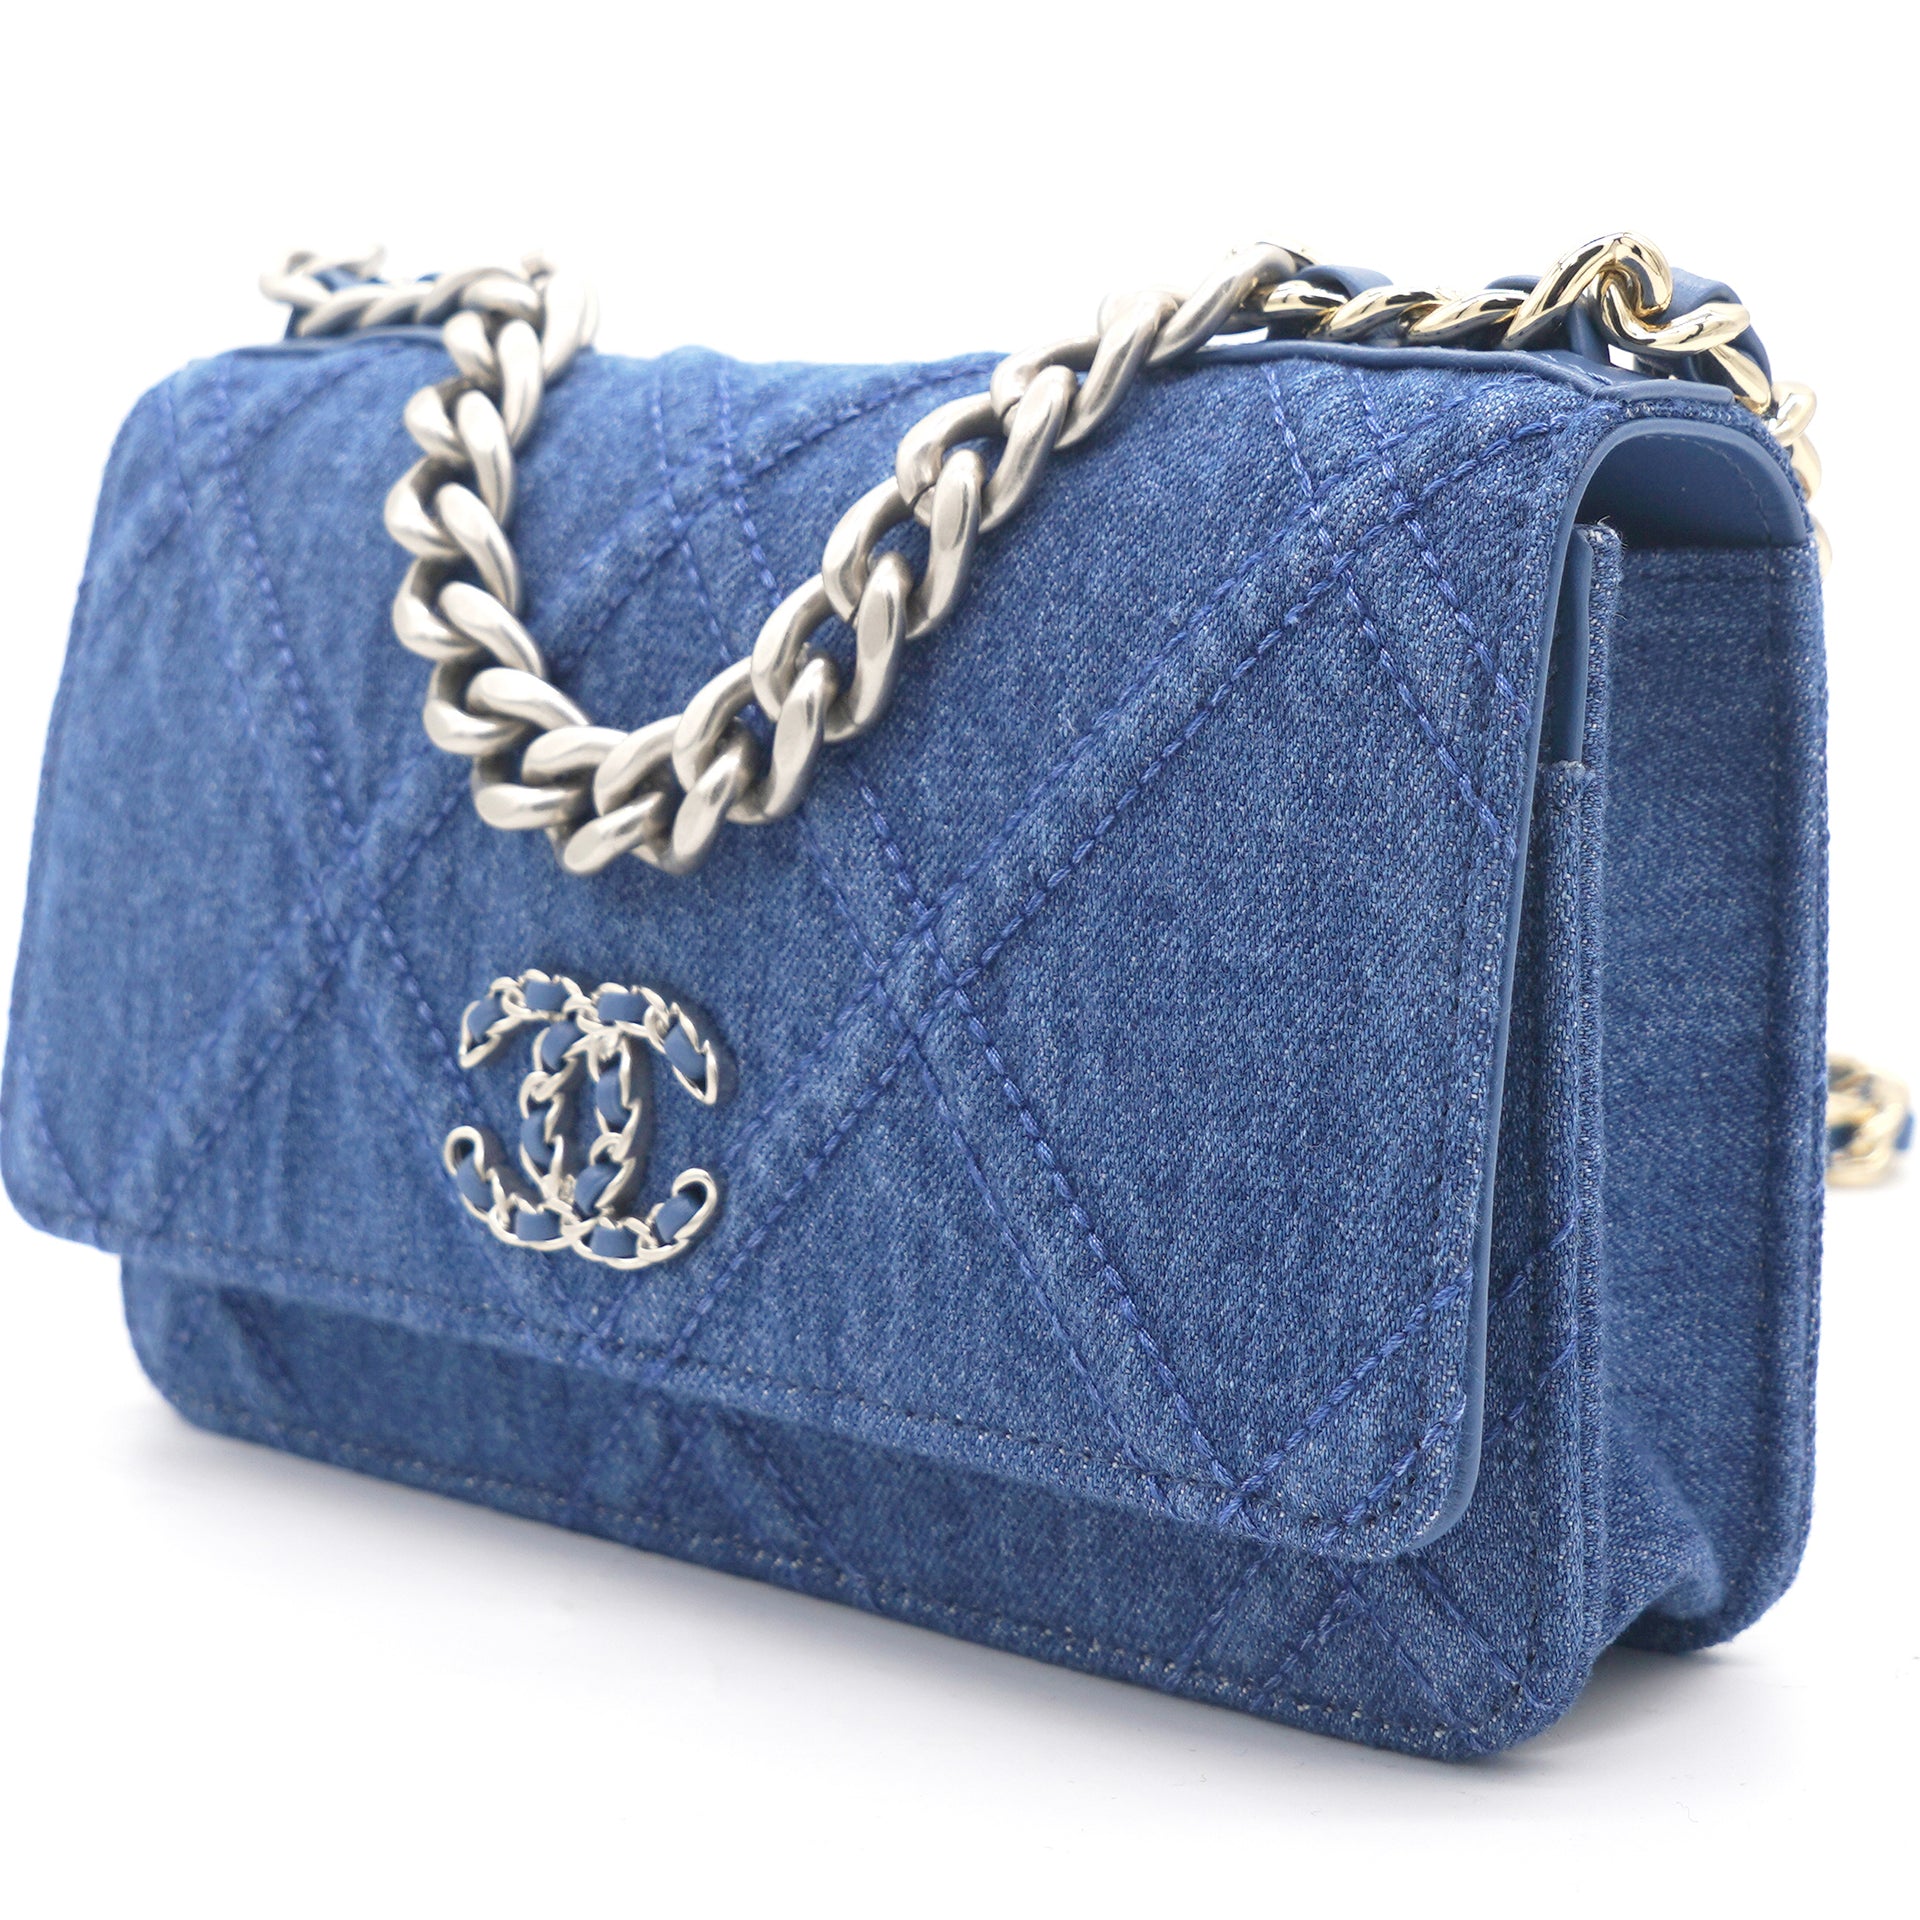 chanel wallet on chain blue